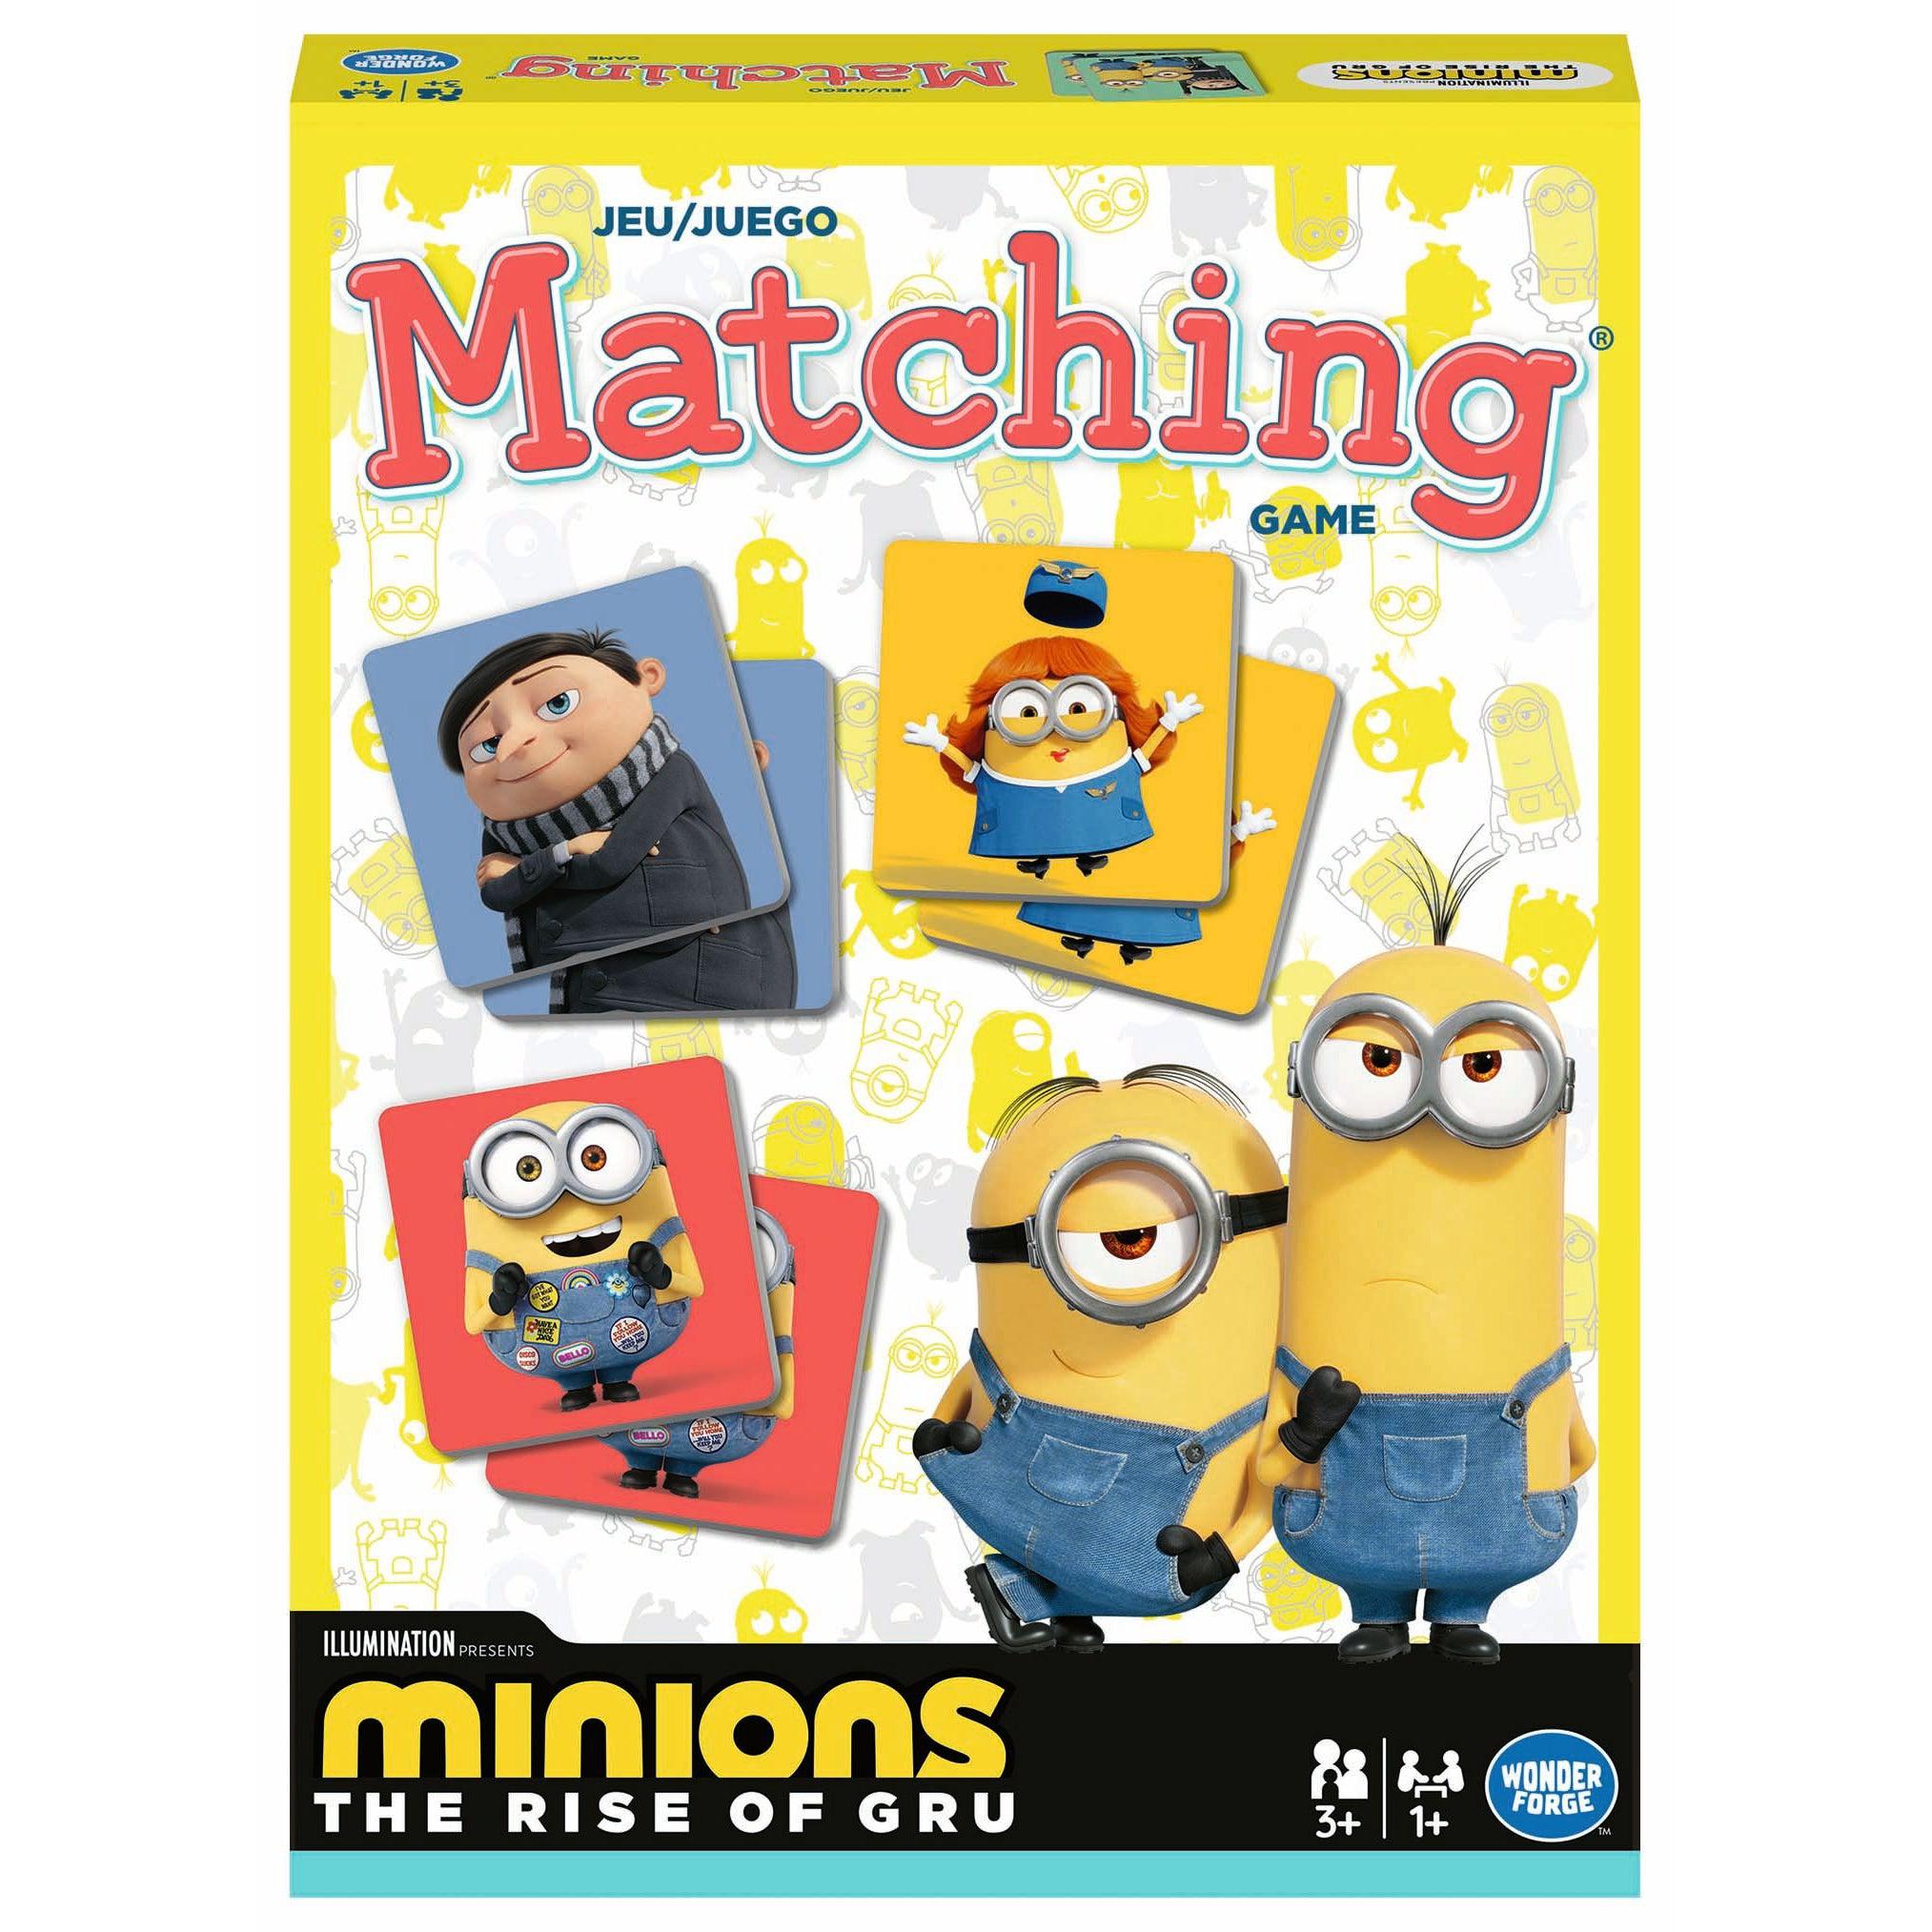 Ravensburger-Minions: The Rise of Gru Matching Game-60002033-Legacy Toys